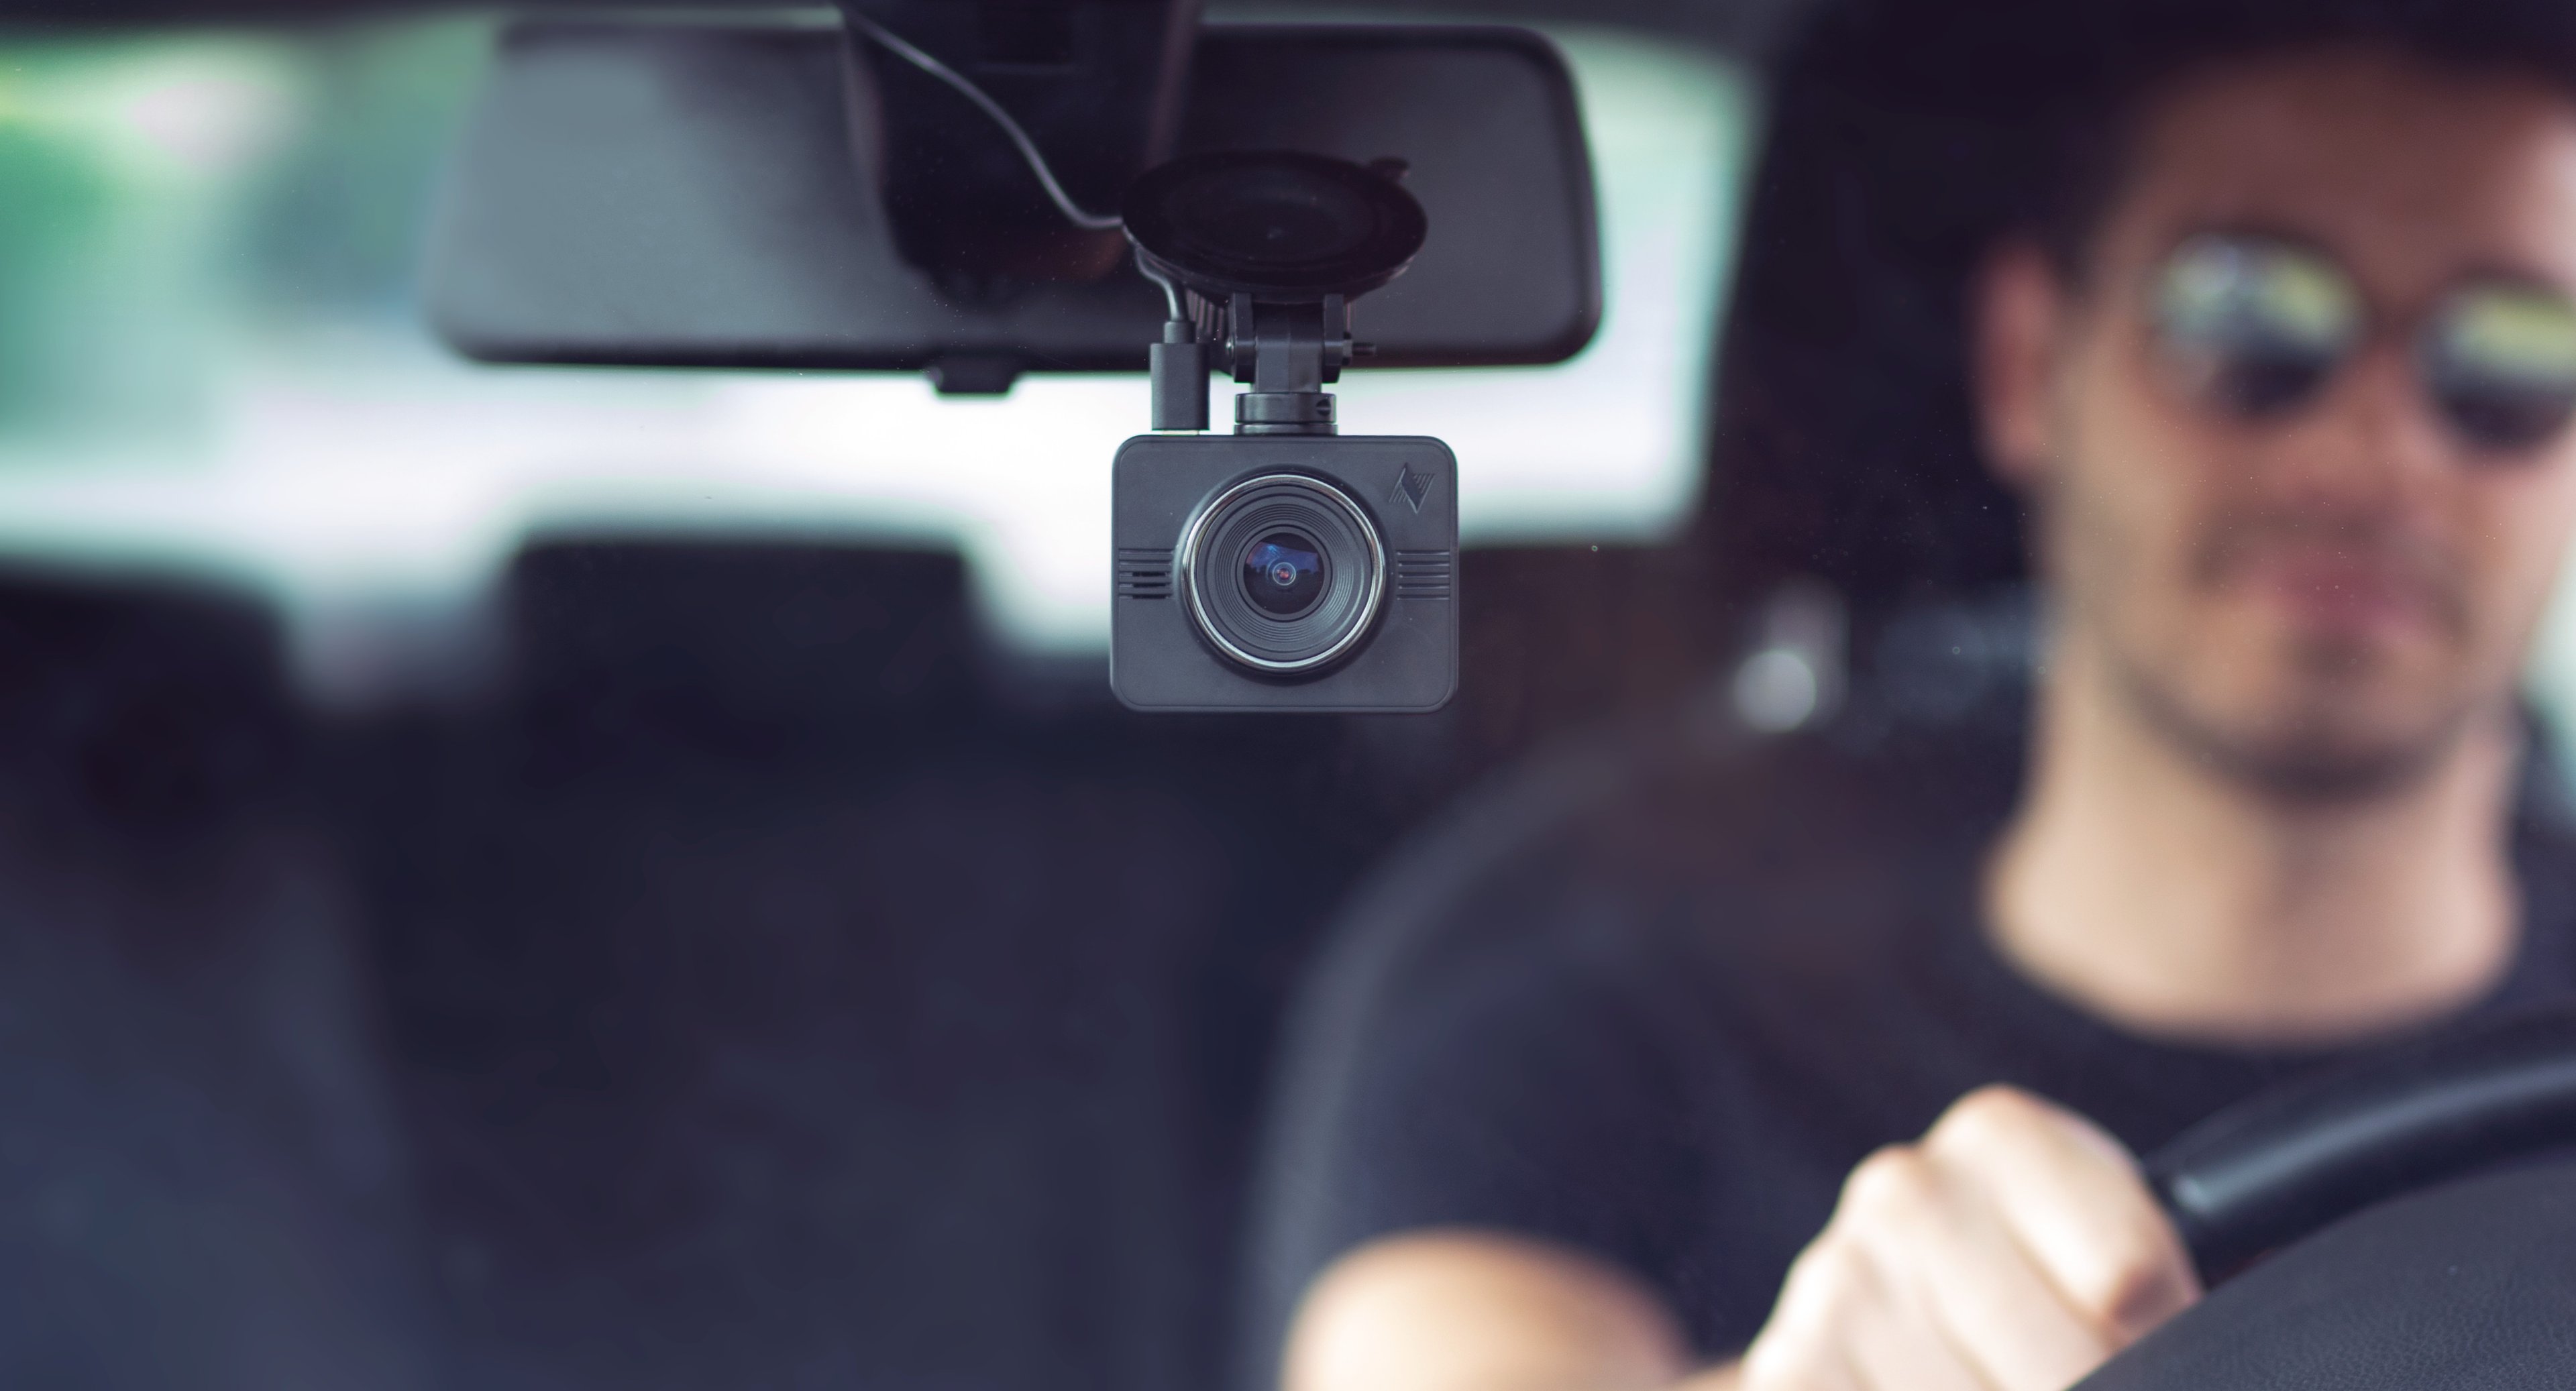 Dash Cams for Fleets - A Complete Guide For 2021